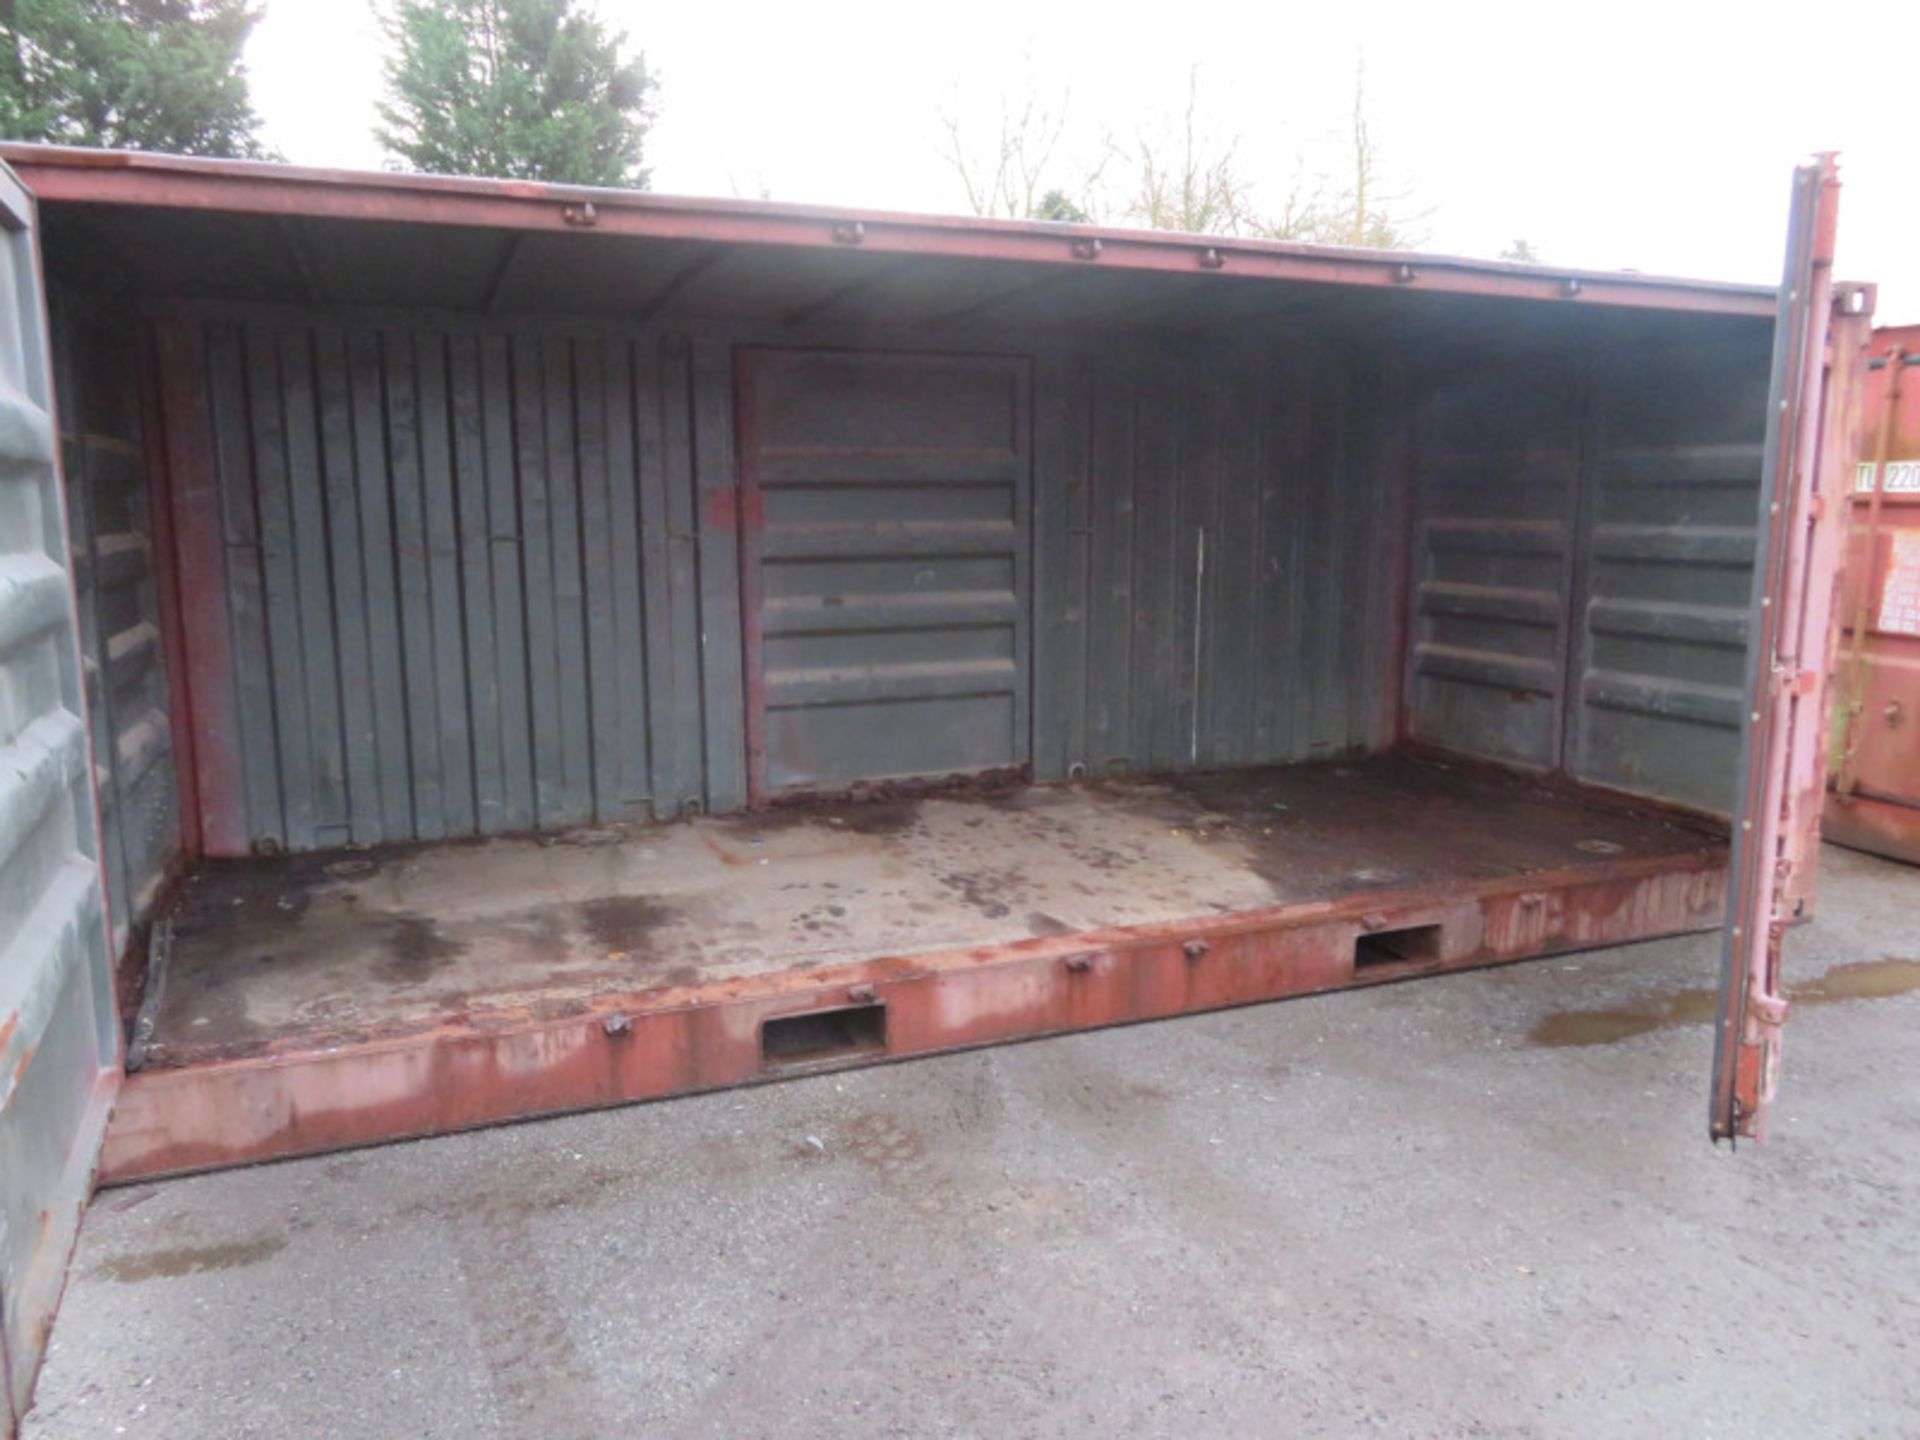 20ft Side and end opening Iso container - 8ft x 8ft x 20ft External Dimensions (Rust marks - Image 6 of 7